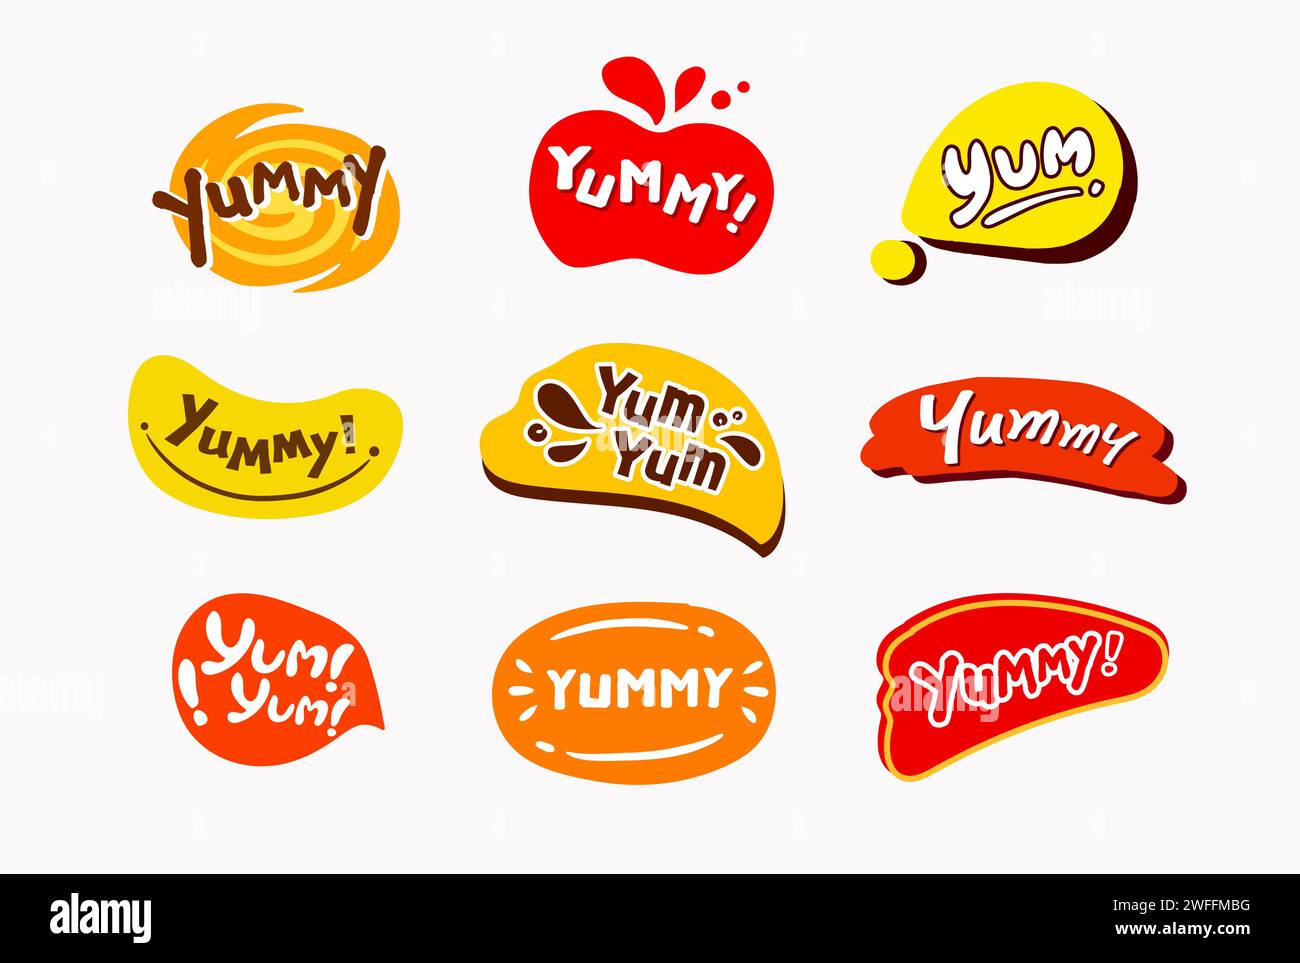 https://c8.alamy.com/comp/2WFFMBG/vector-yummy-speech-bubbles-hand-drawn-collection-cute-icon-talking-bubble-stickers-with-fun-style-2WFFMBG.jpg